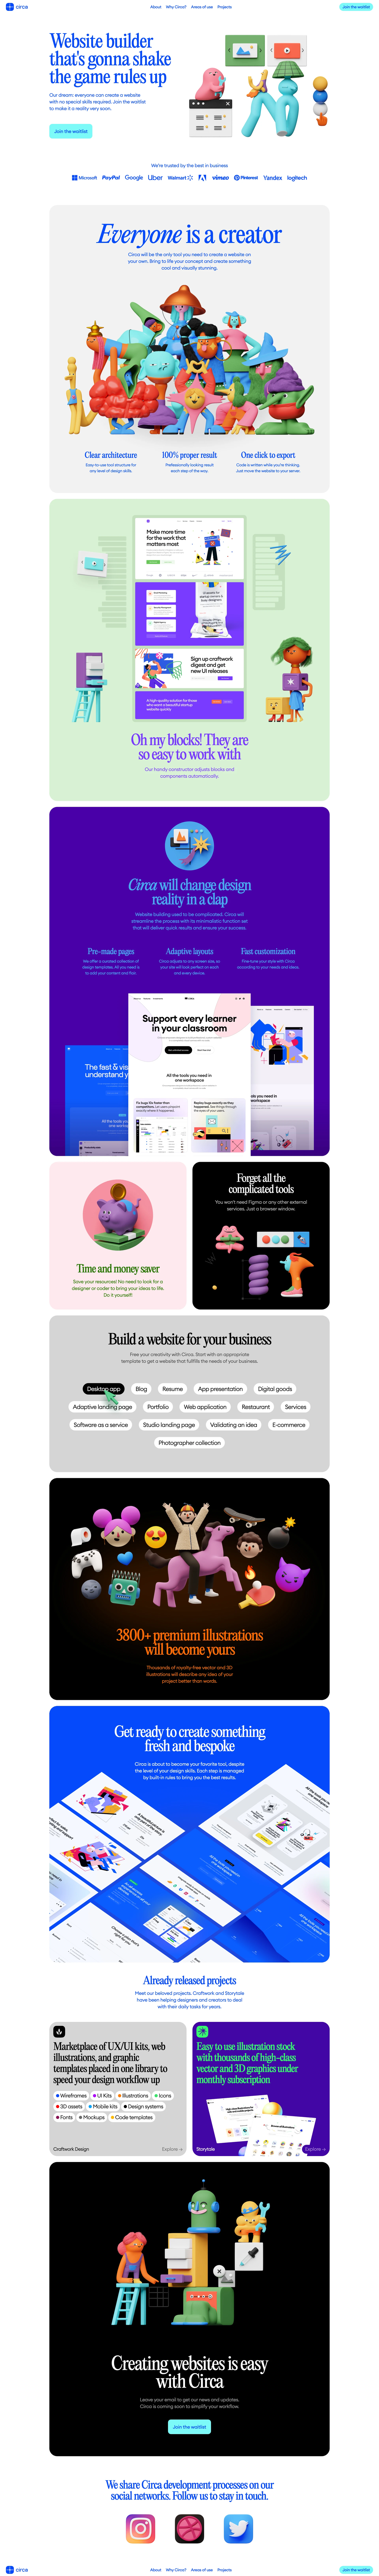 Circa Landing Page Example: Circa No-Code Website Builder. Free website building tool for your business. Get started with one of the customizable design templates and fill it out with unique content.